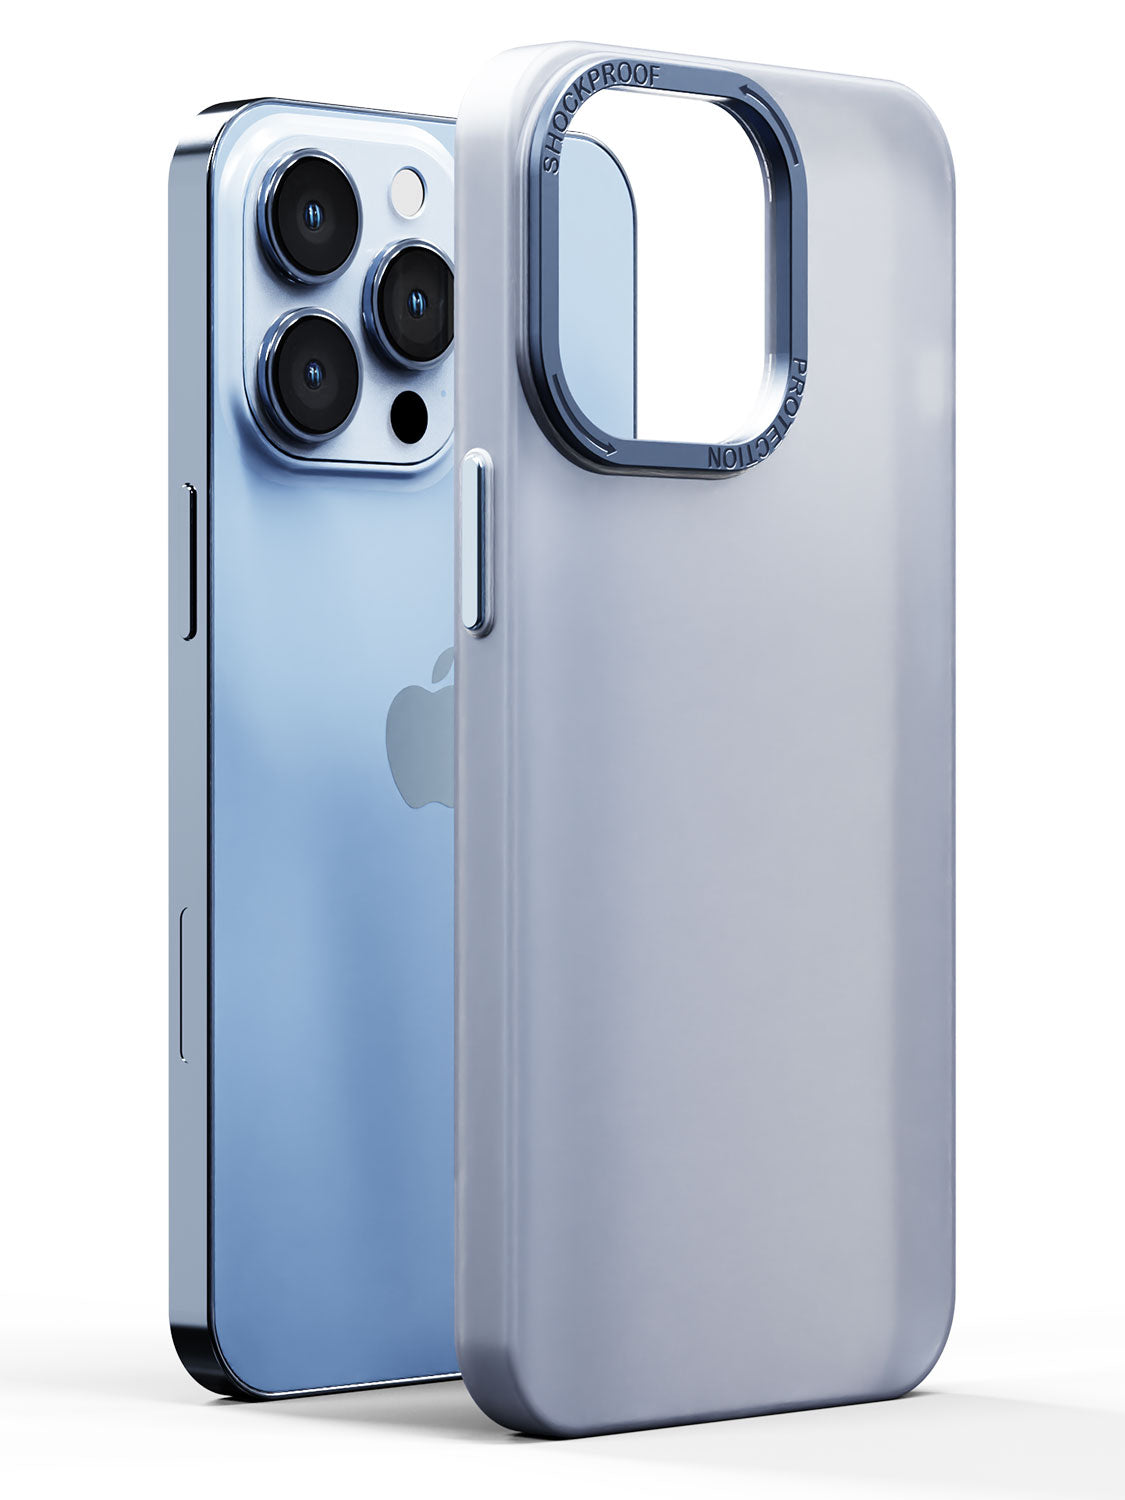 iphone 13 pro case with camera protection , iphone 13 pro cover with camera protection , iphone 13 pro case cover with camera protection , iphone 13 pro back cover with camera protection